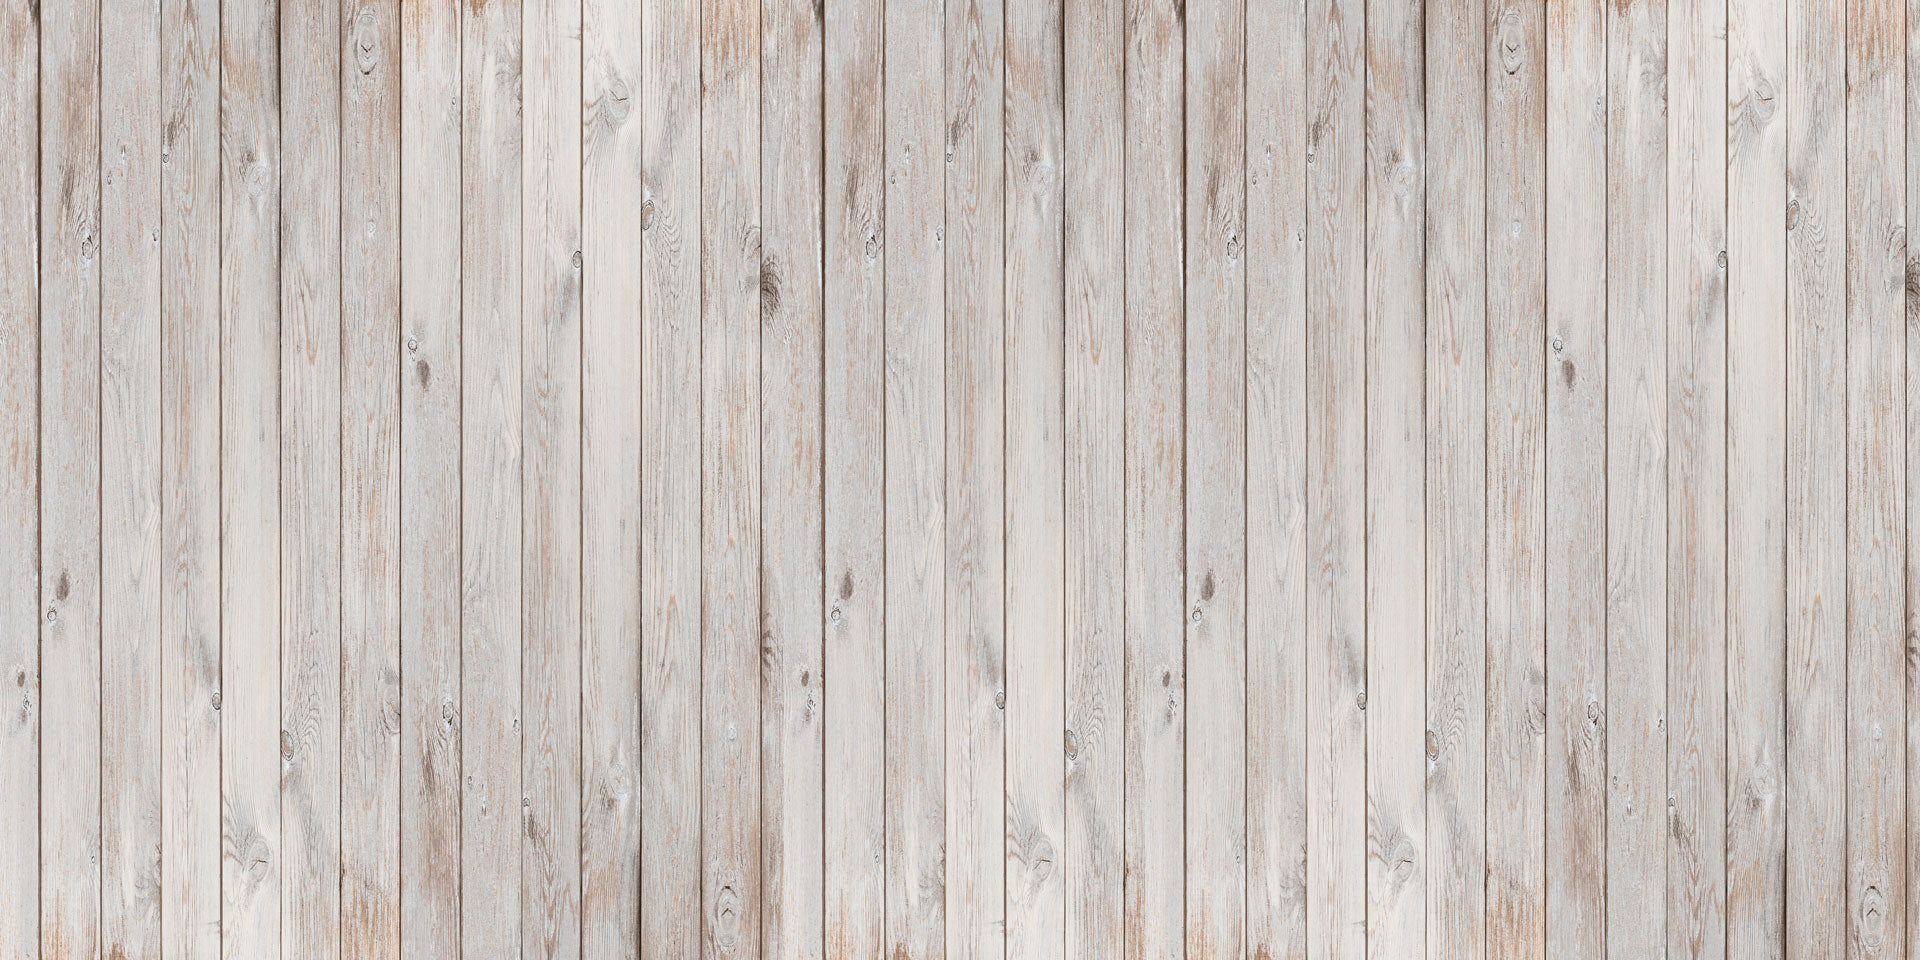 Kate Retro Old White Distressed Wood Wall of Portail Backdrop for photography